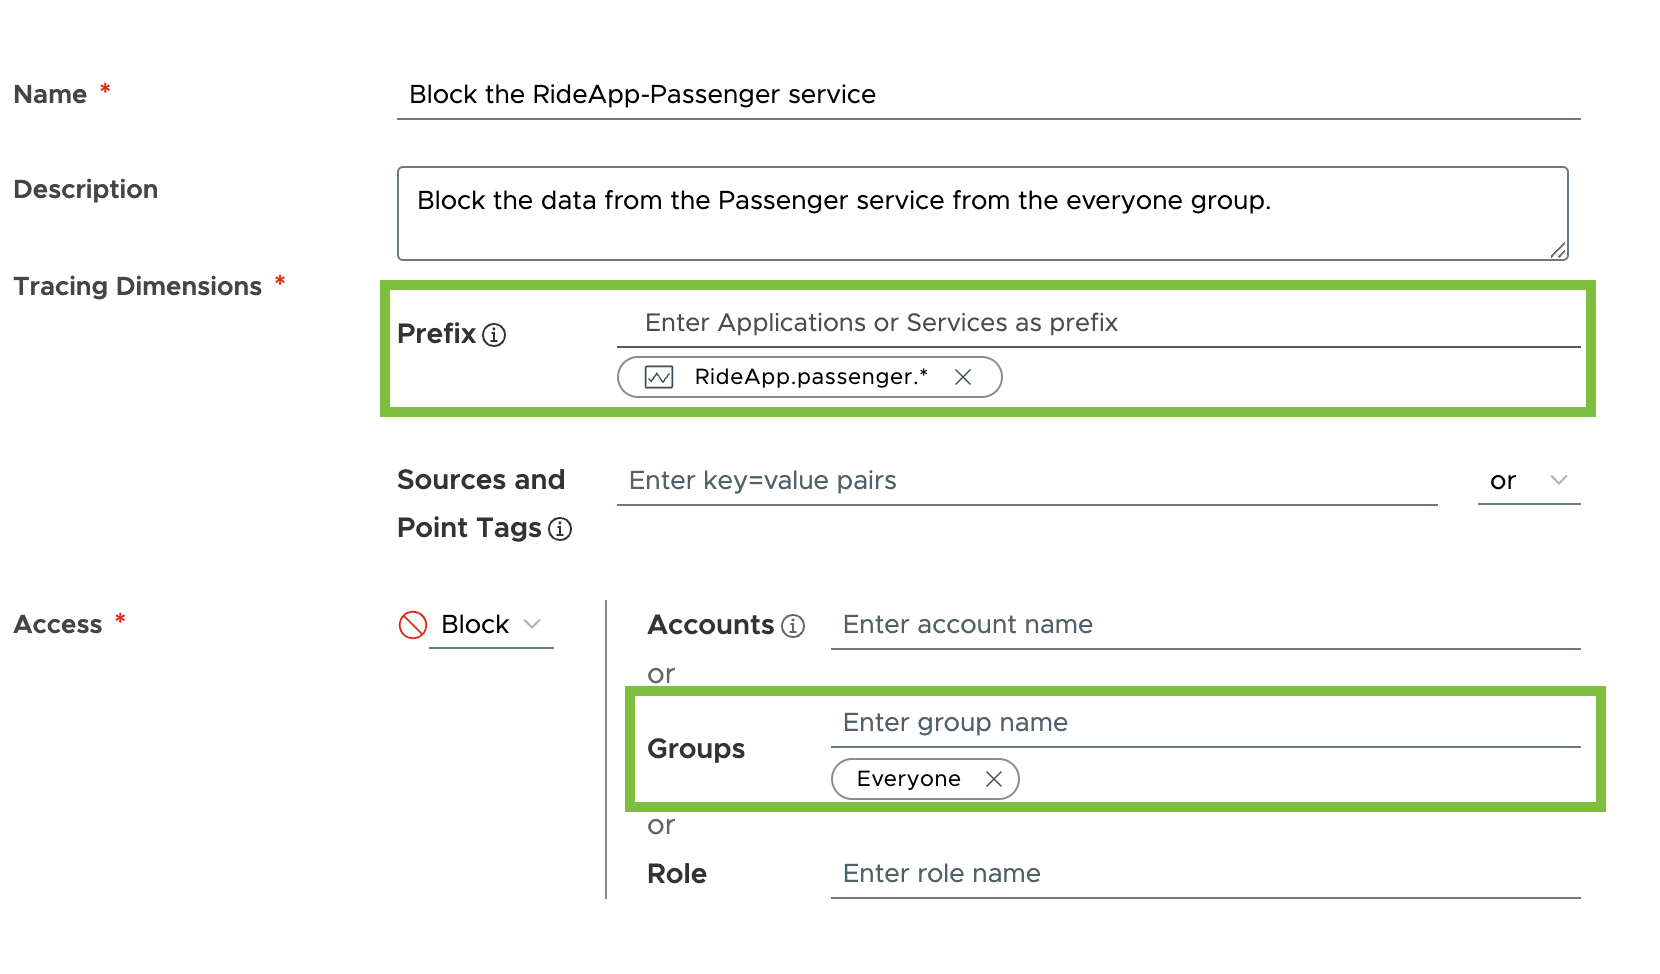 A screenshot of the traces security policy created to block the user group everyone from seeing data of the RiderApp's passenger service.